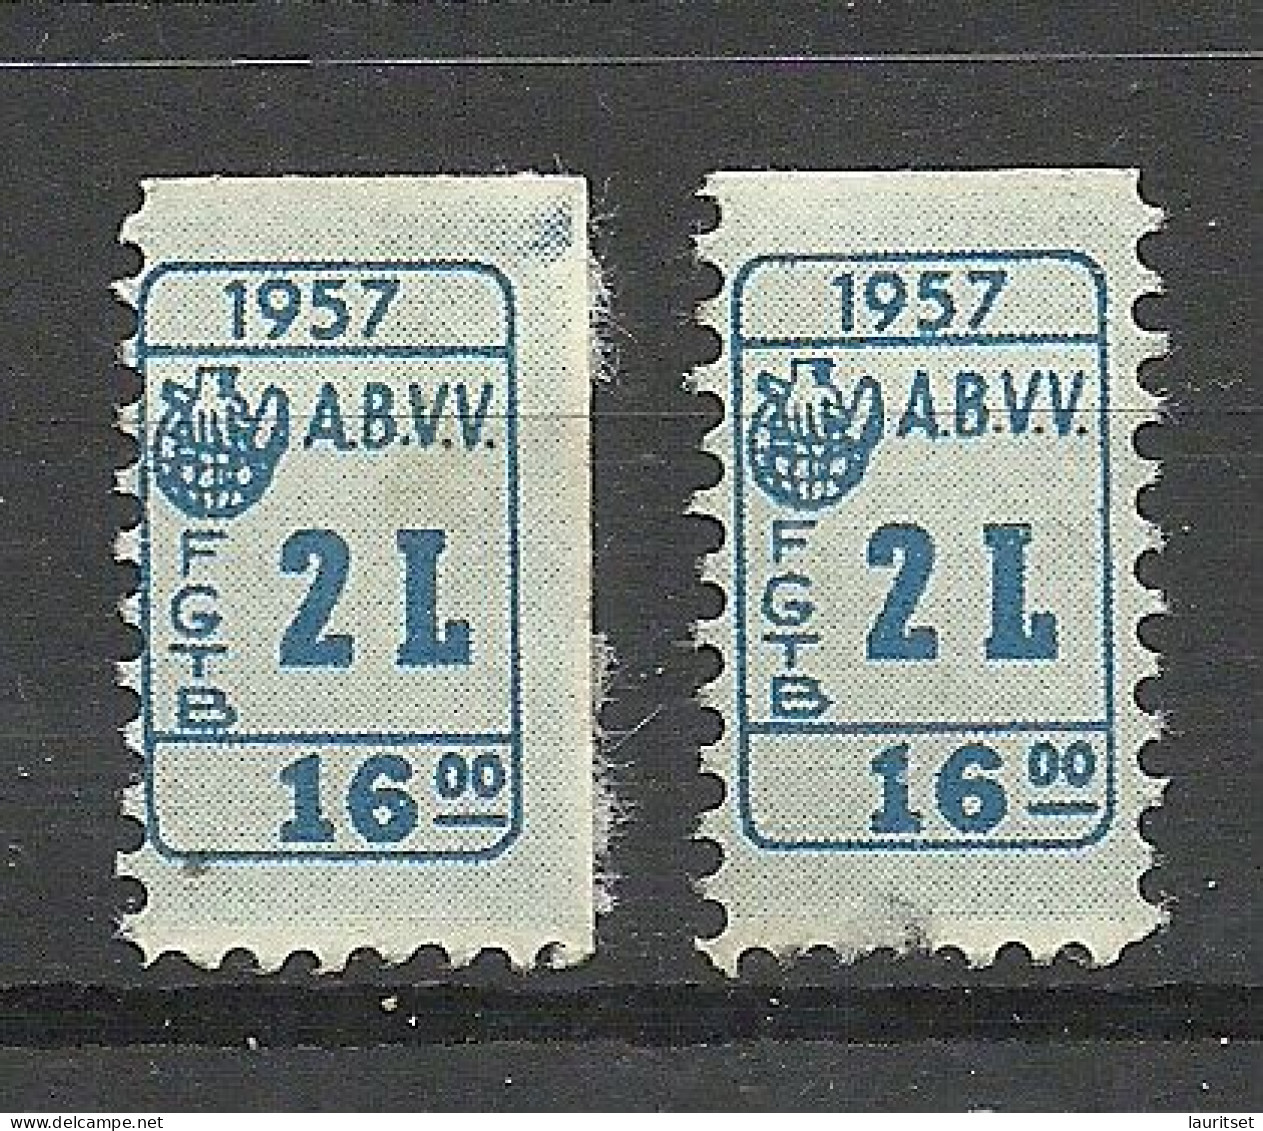 USA Or Great Britain 1957, 2 Consumer Stamps (*) - Erinnophilie